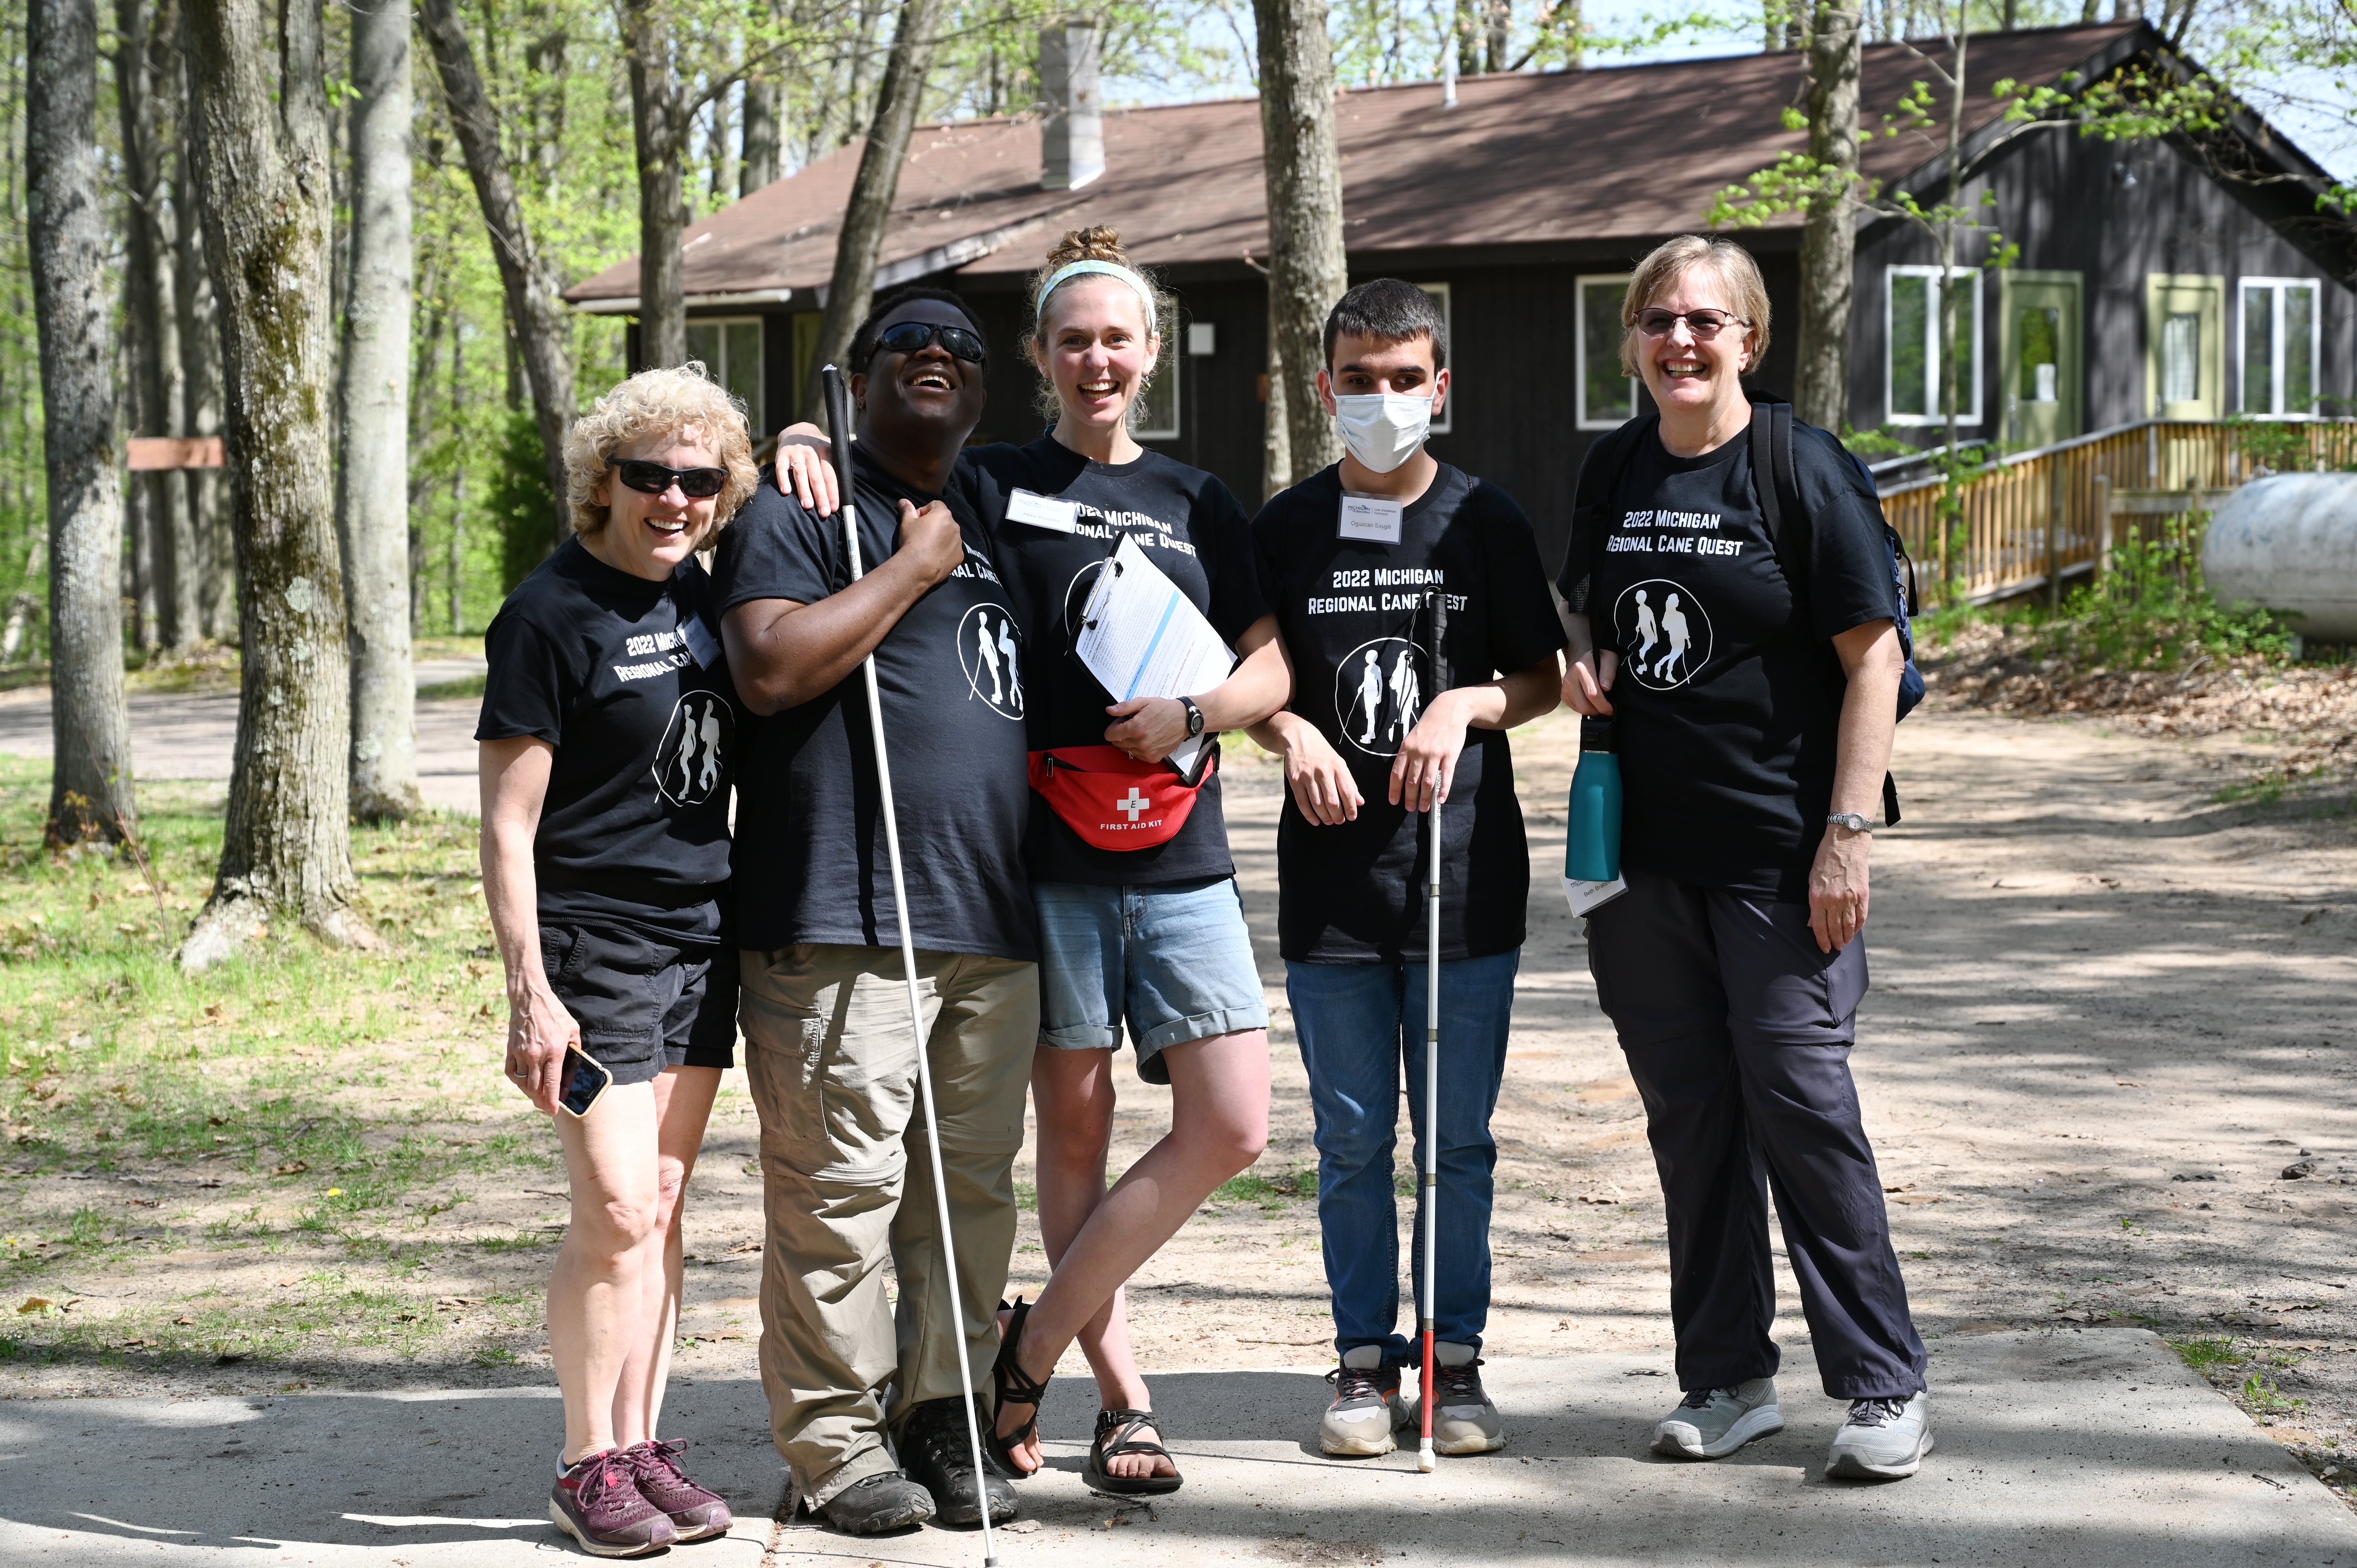 Five Cane Quest volunteers smile for a photo outside at Camp T.